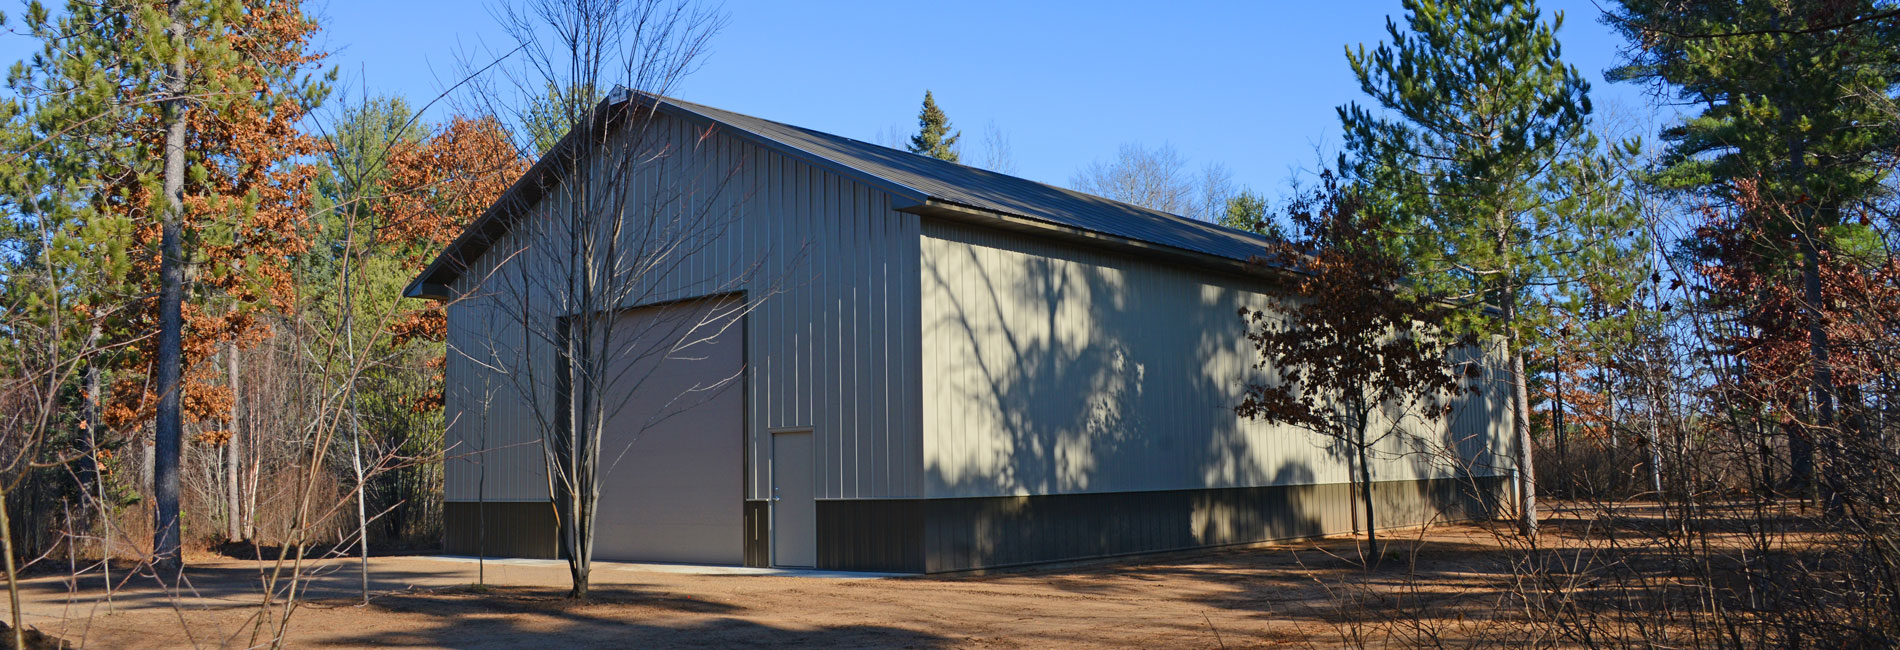 Residential Storage and Garages